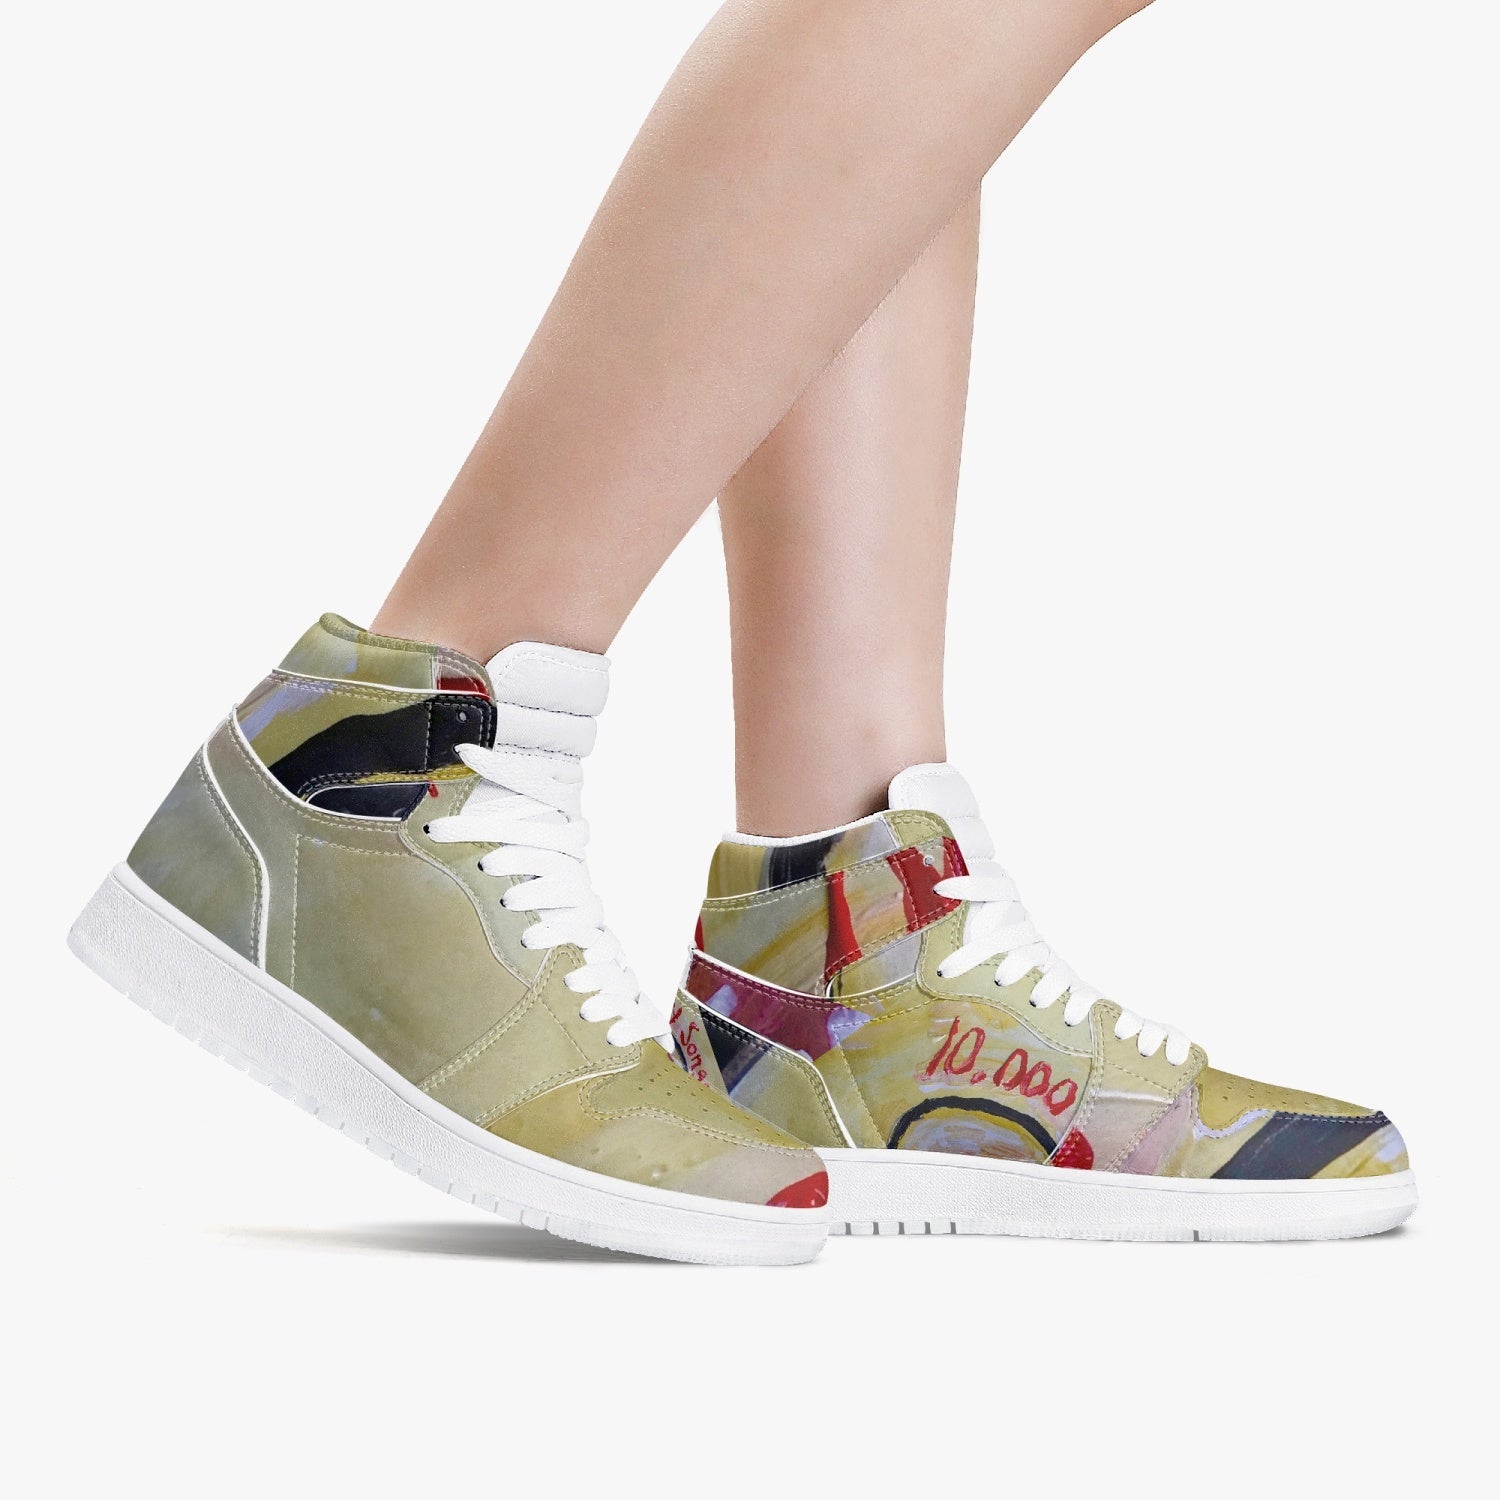 236. New High-Top Leather Sneakers - White